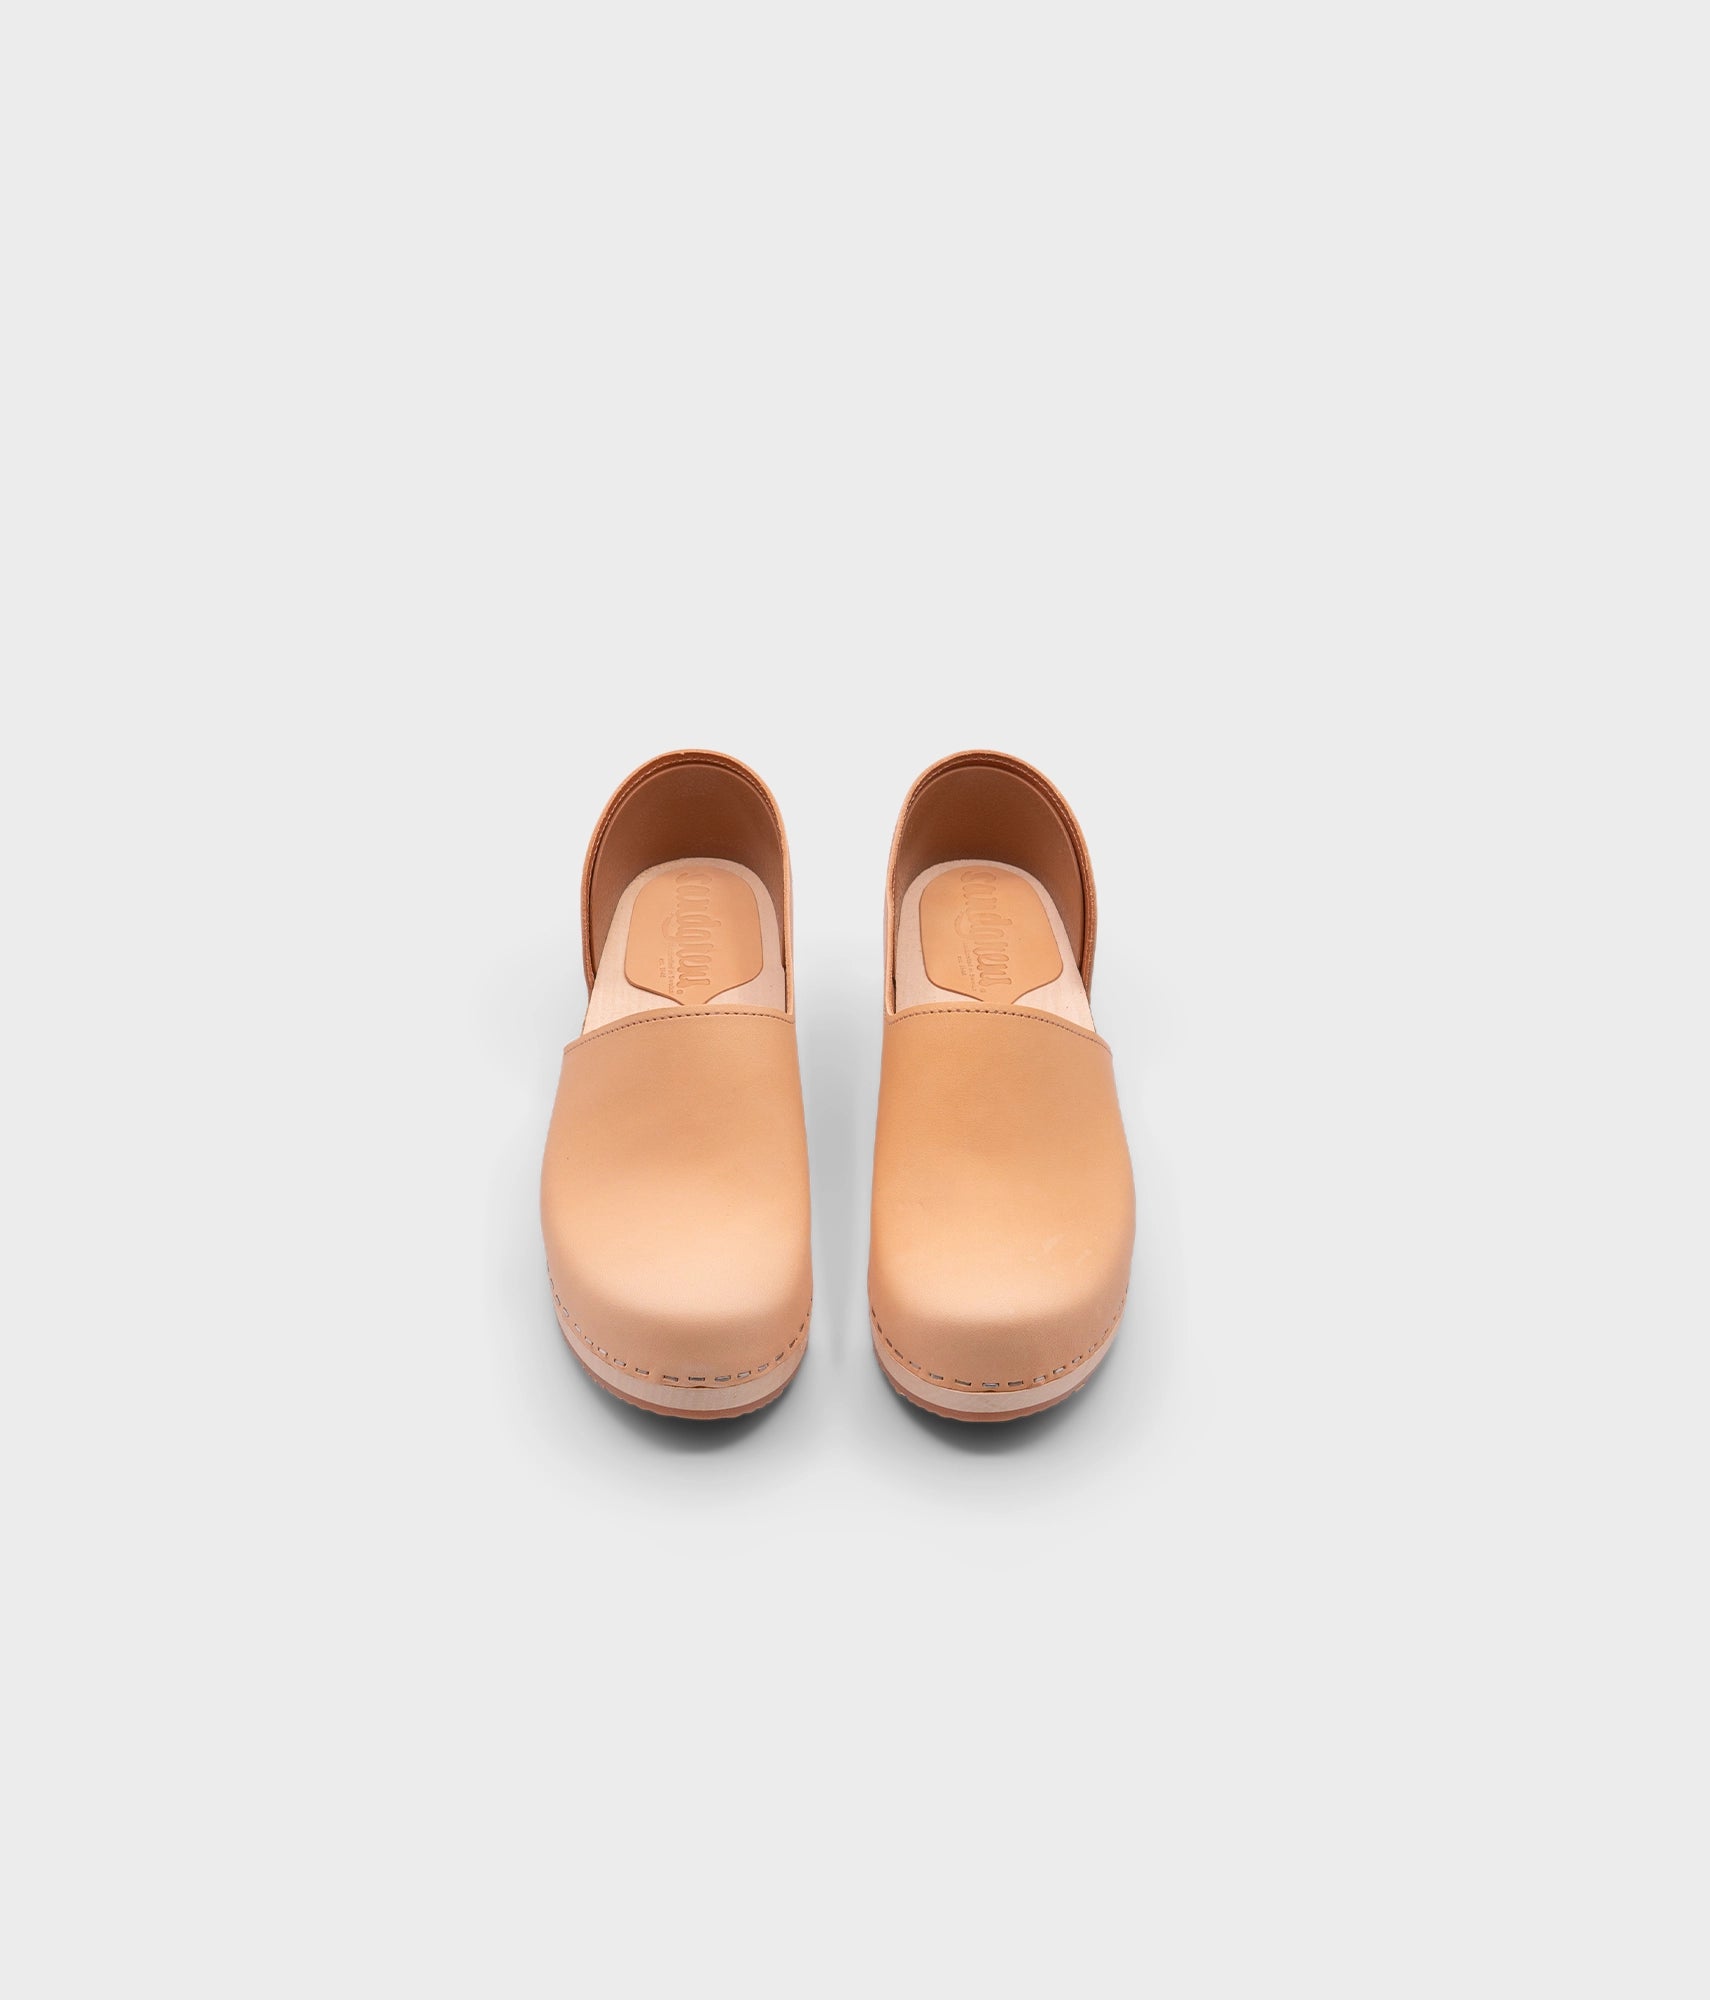 low heeled closed-back clogs in beige vegetable tanned leather stapled on a light wooden base